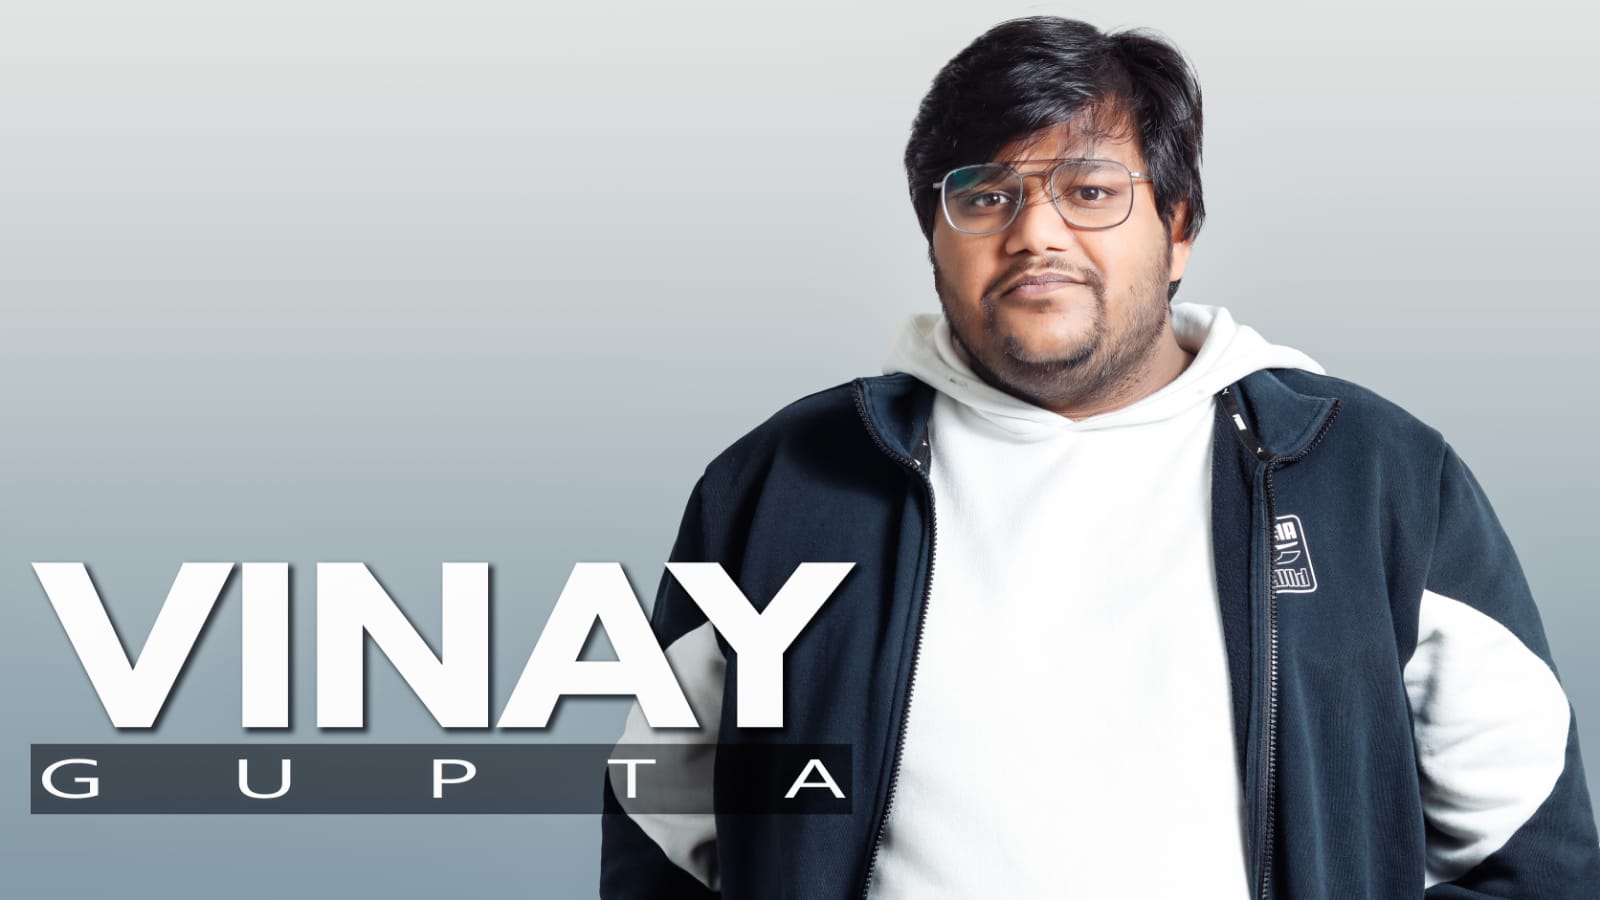 Producer Vinay Gupta is one such name that comes in the latter category, whose love for films and sports led him towards making it his profession.